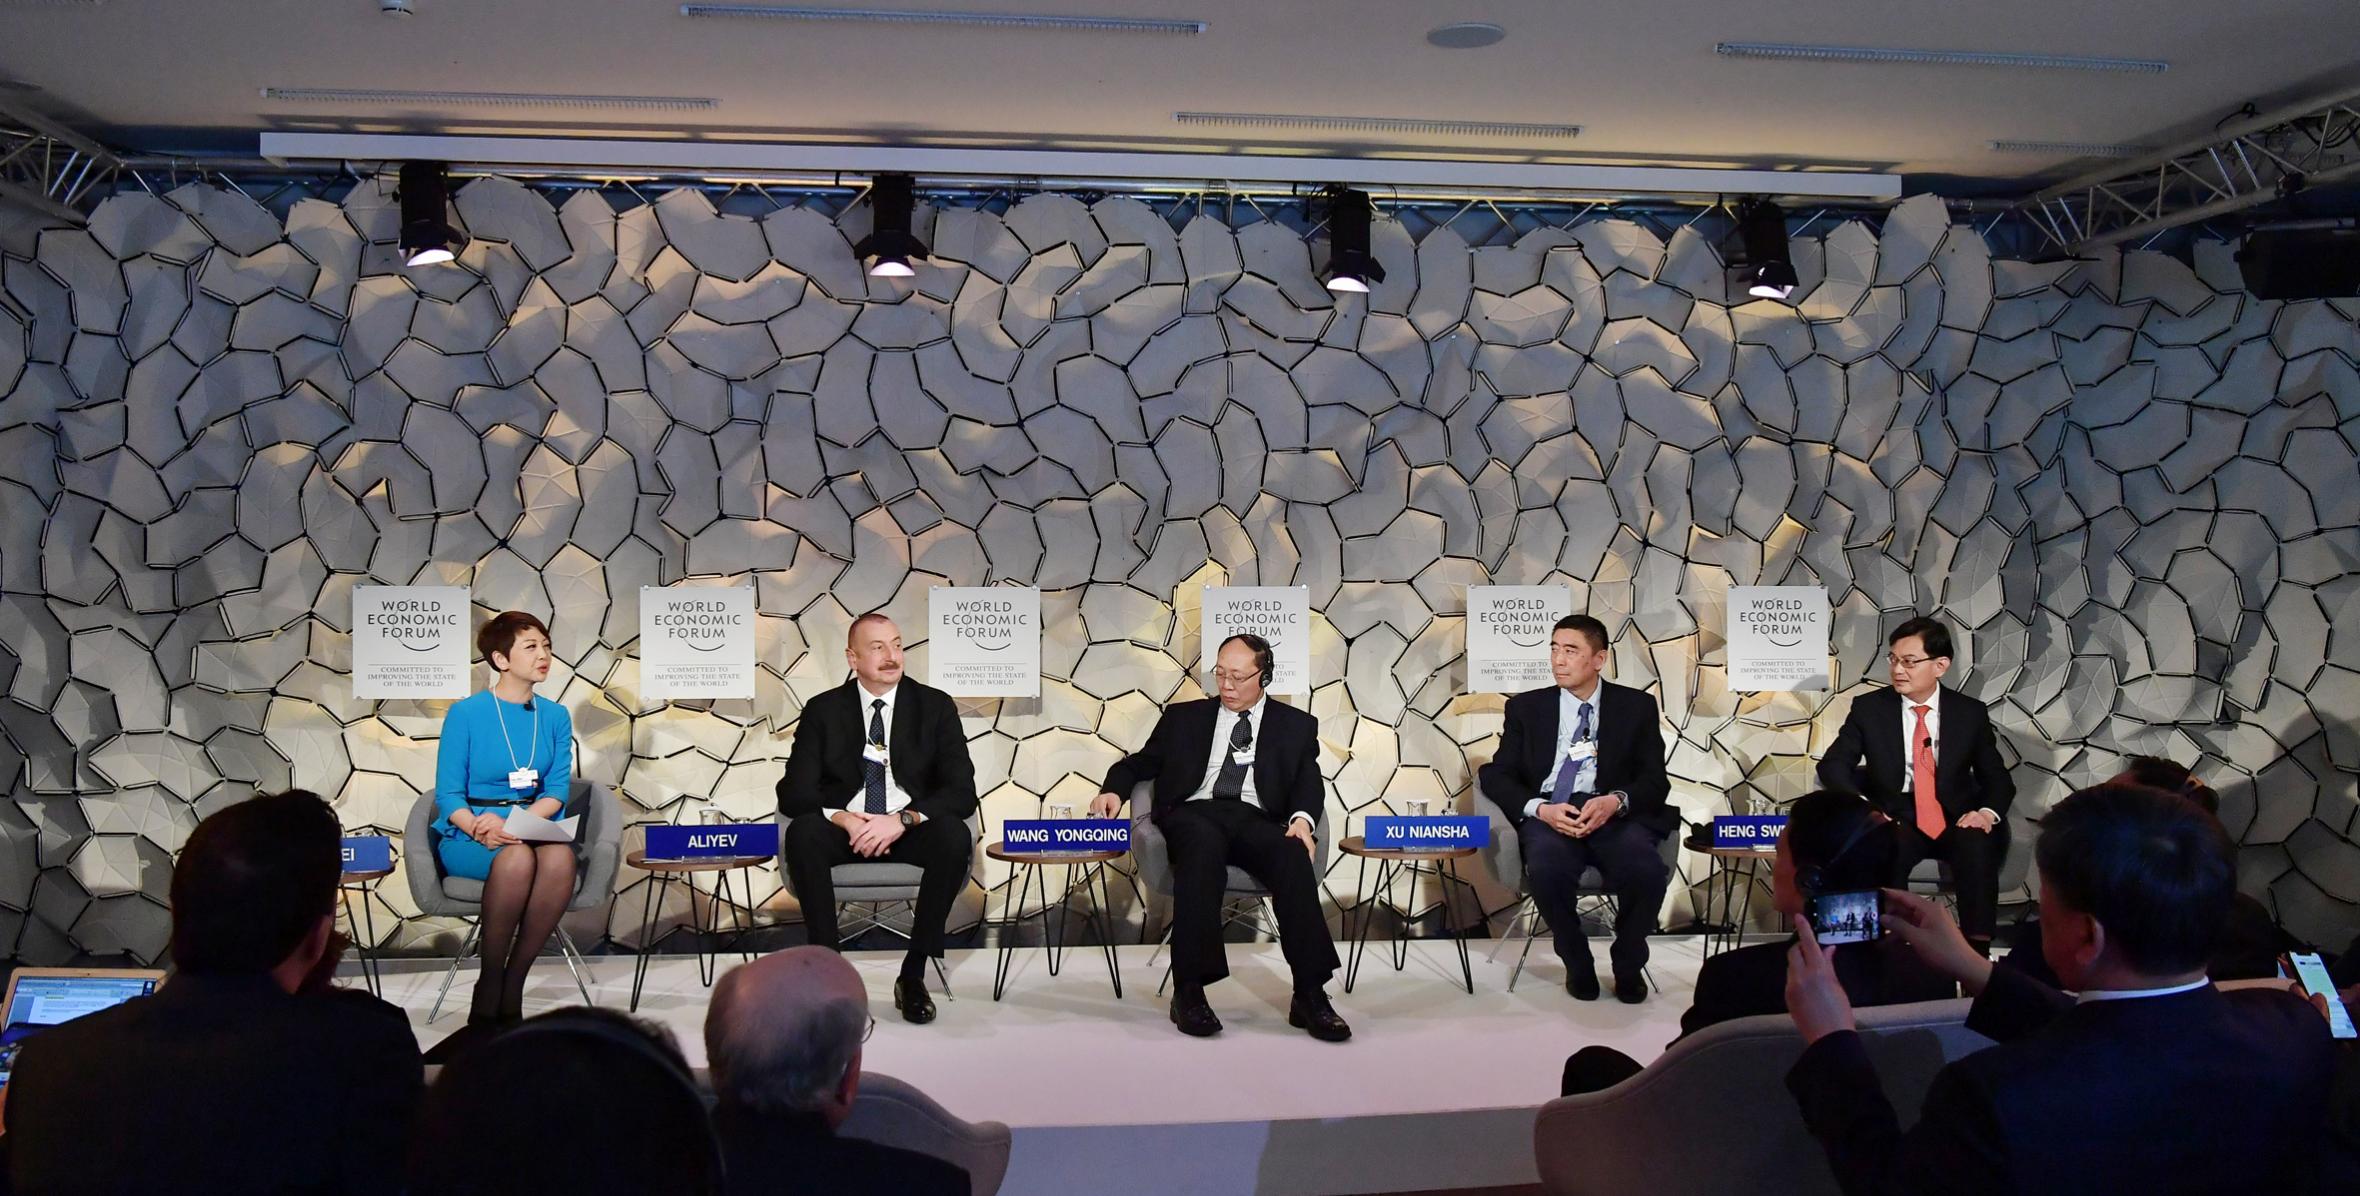 Ilham Aliyev attended “Advancing the Belt and Road Initiative: China`s Trillion Dollar Vision” session in Davos